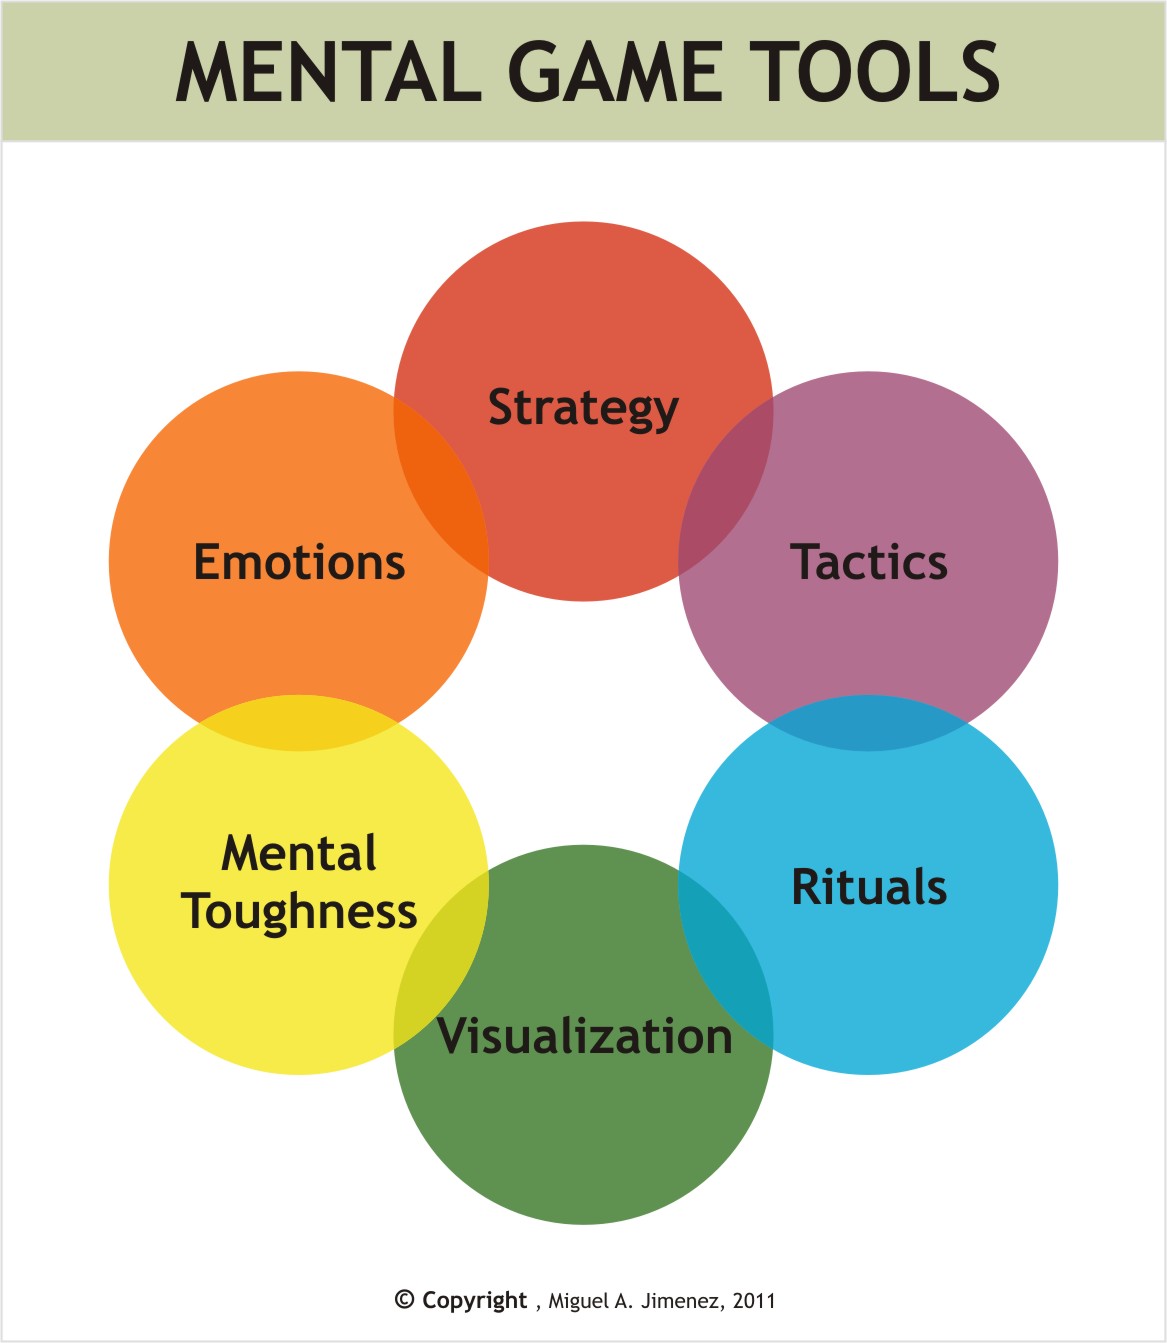 I. Introduction to the Mental Game